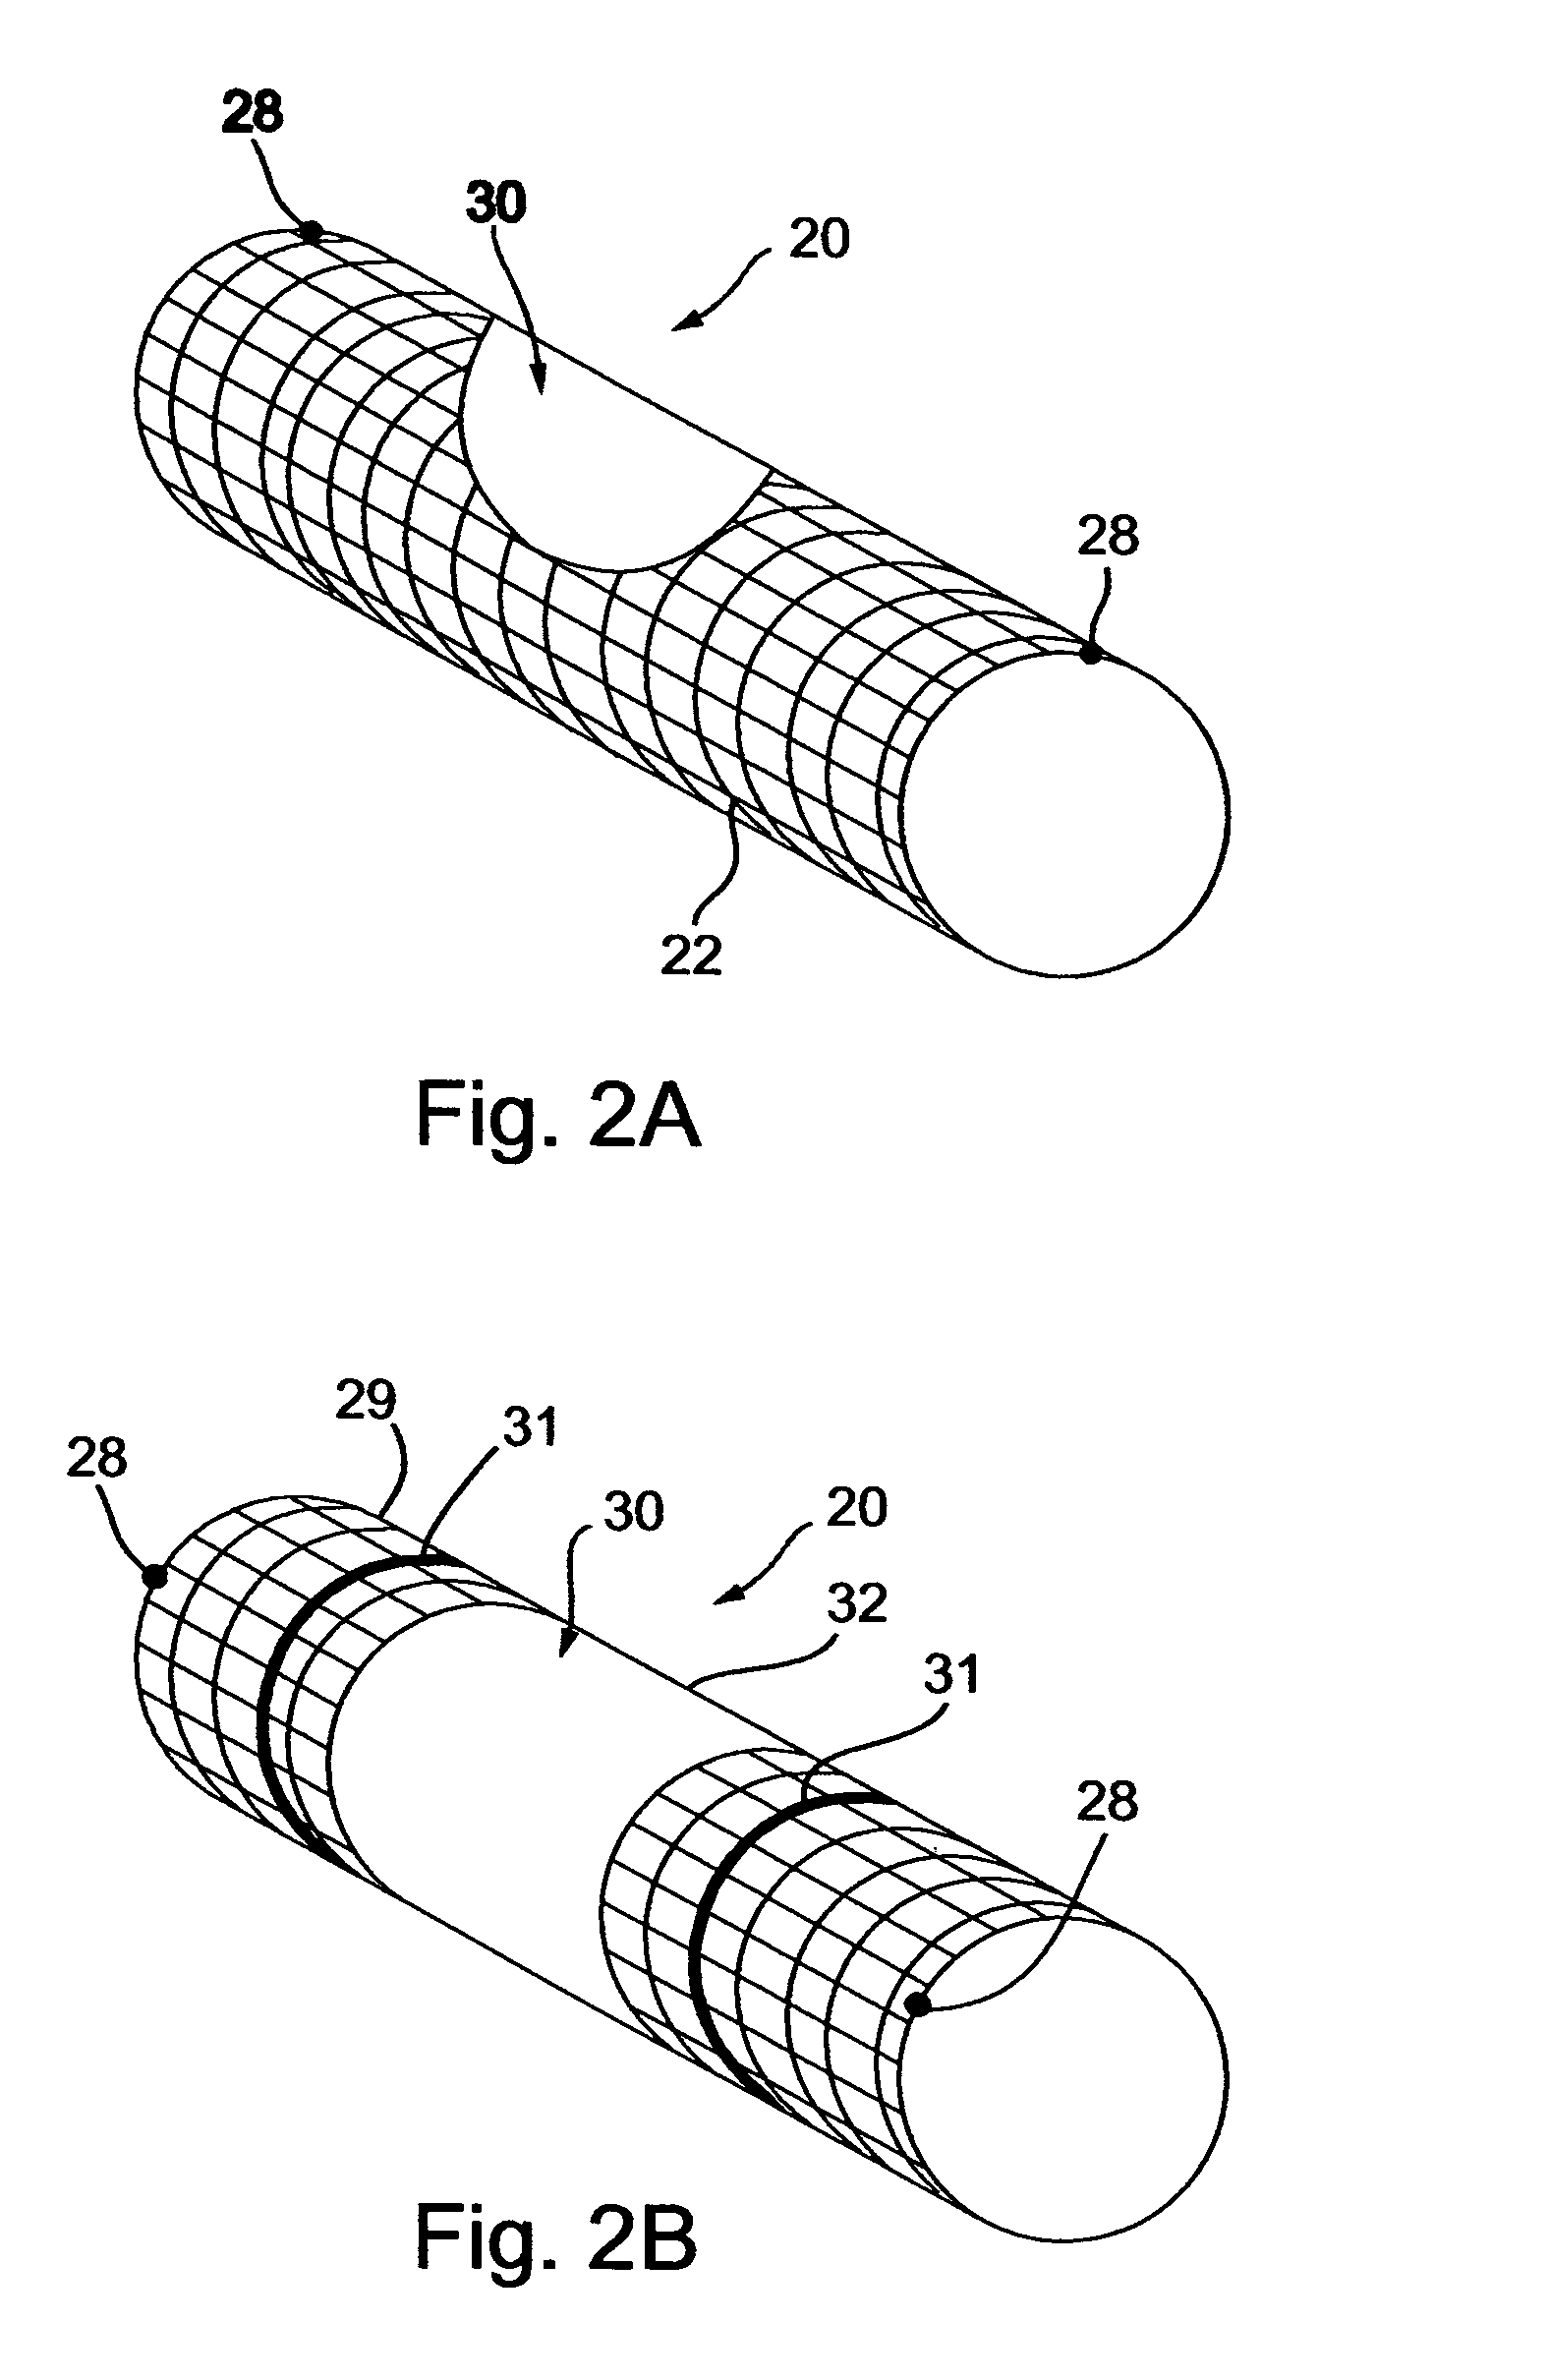 Implantable composite device and corresponding method for deflecting embolic material in blood flowing at an arterial bifurcation